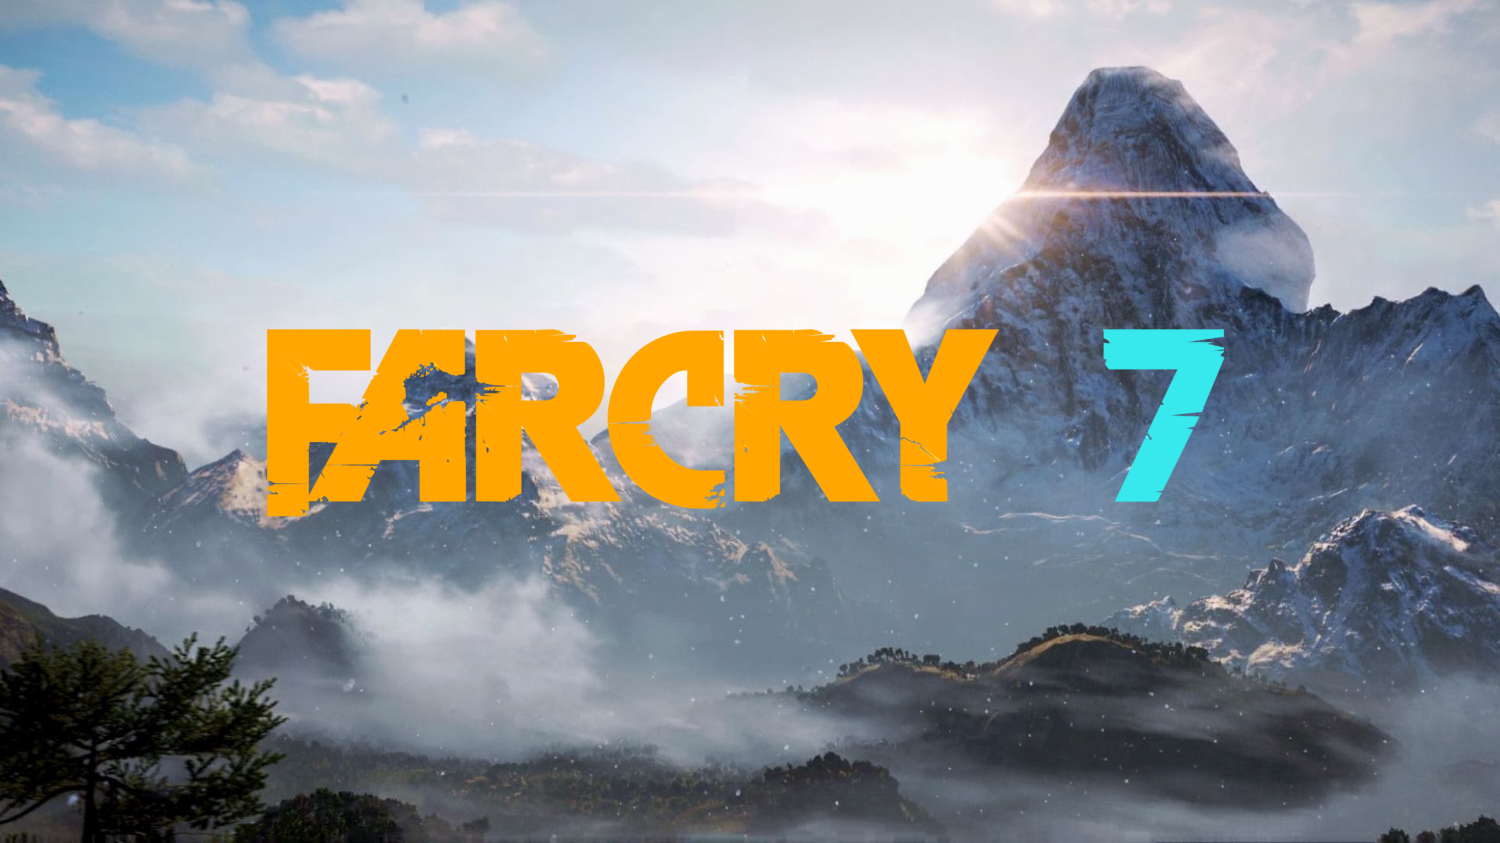 Far Cry 7' reportedly in development at Ubisoft alongside multiplayer game